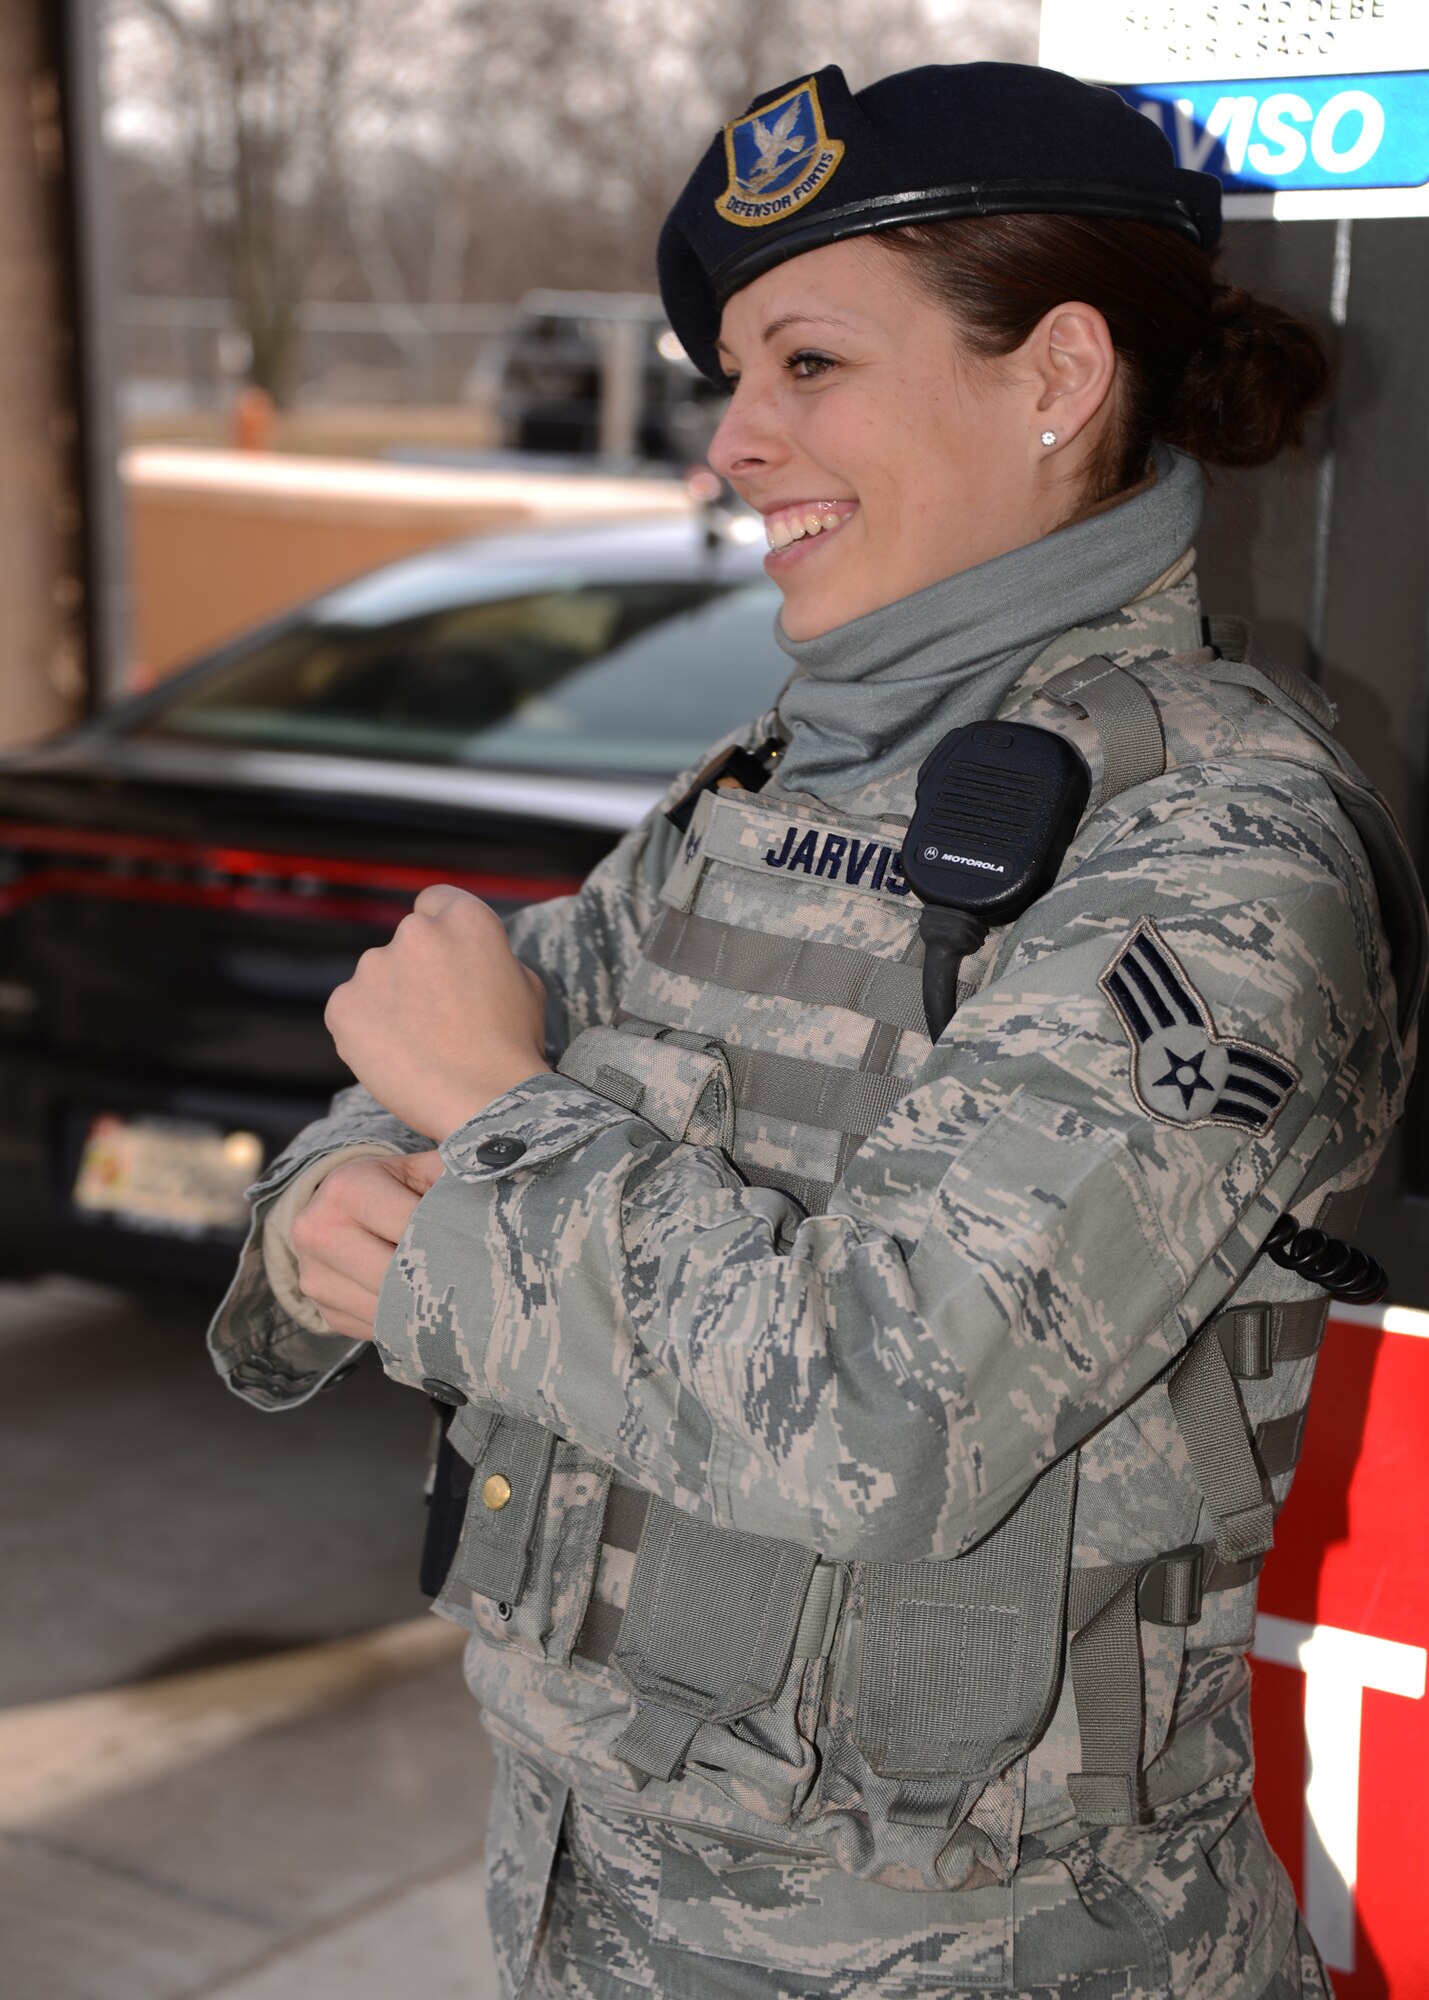 Senior Airman Miriam Jarvis, 175th Security Forces Squadron, stands at the front gate of Warfield Air National Guard base, Baltimore, Md. on February 4, 2014.  Senior Airman Jarvis has been working with the 175th Security Forces Squadron since August 13, 2008.  (Air National Guard photo by Senior Master Sgt. Edward Bard/RELEASED)